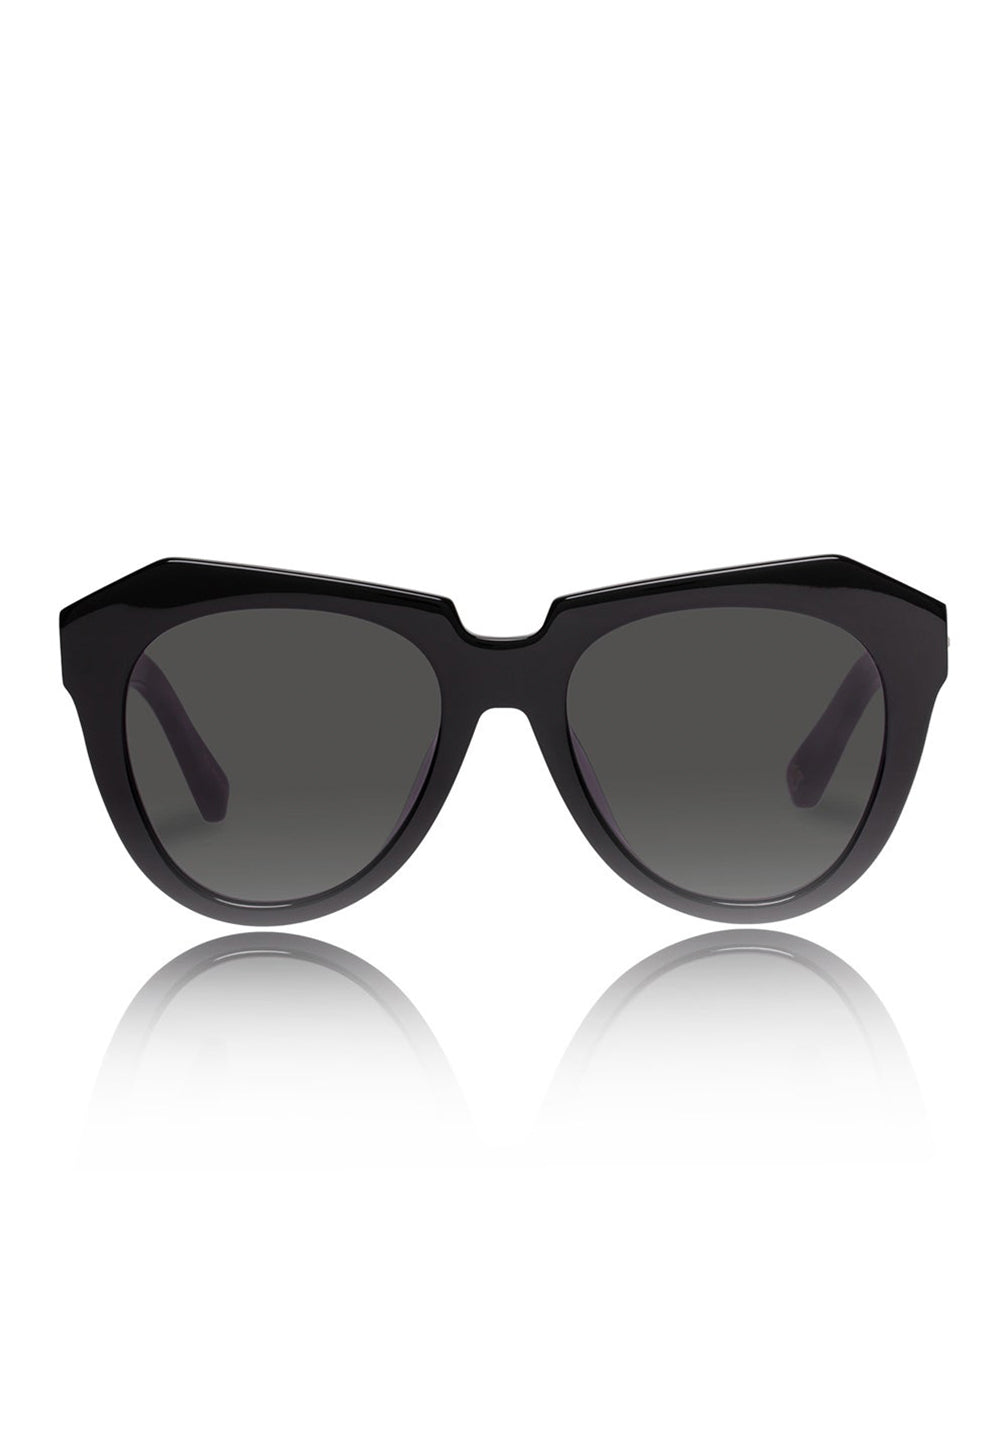 Number One Sunglasses - Black sold by Angel Divine